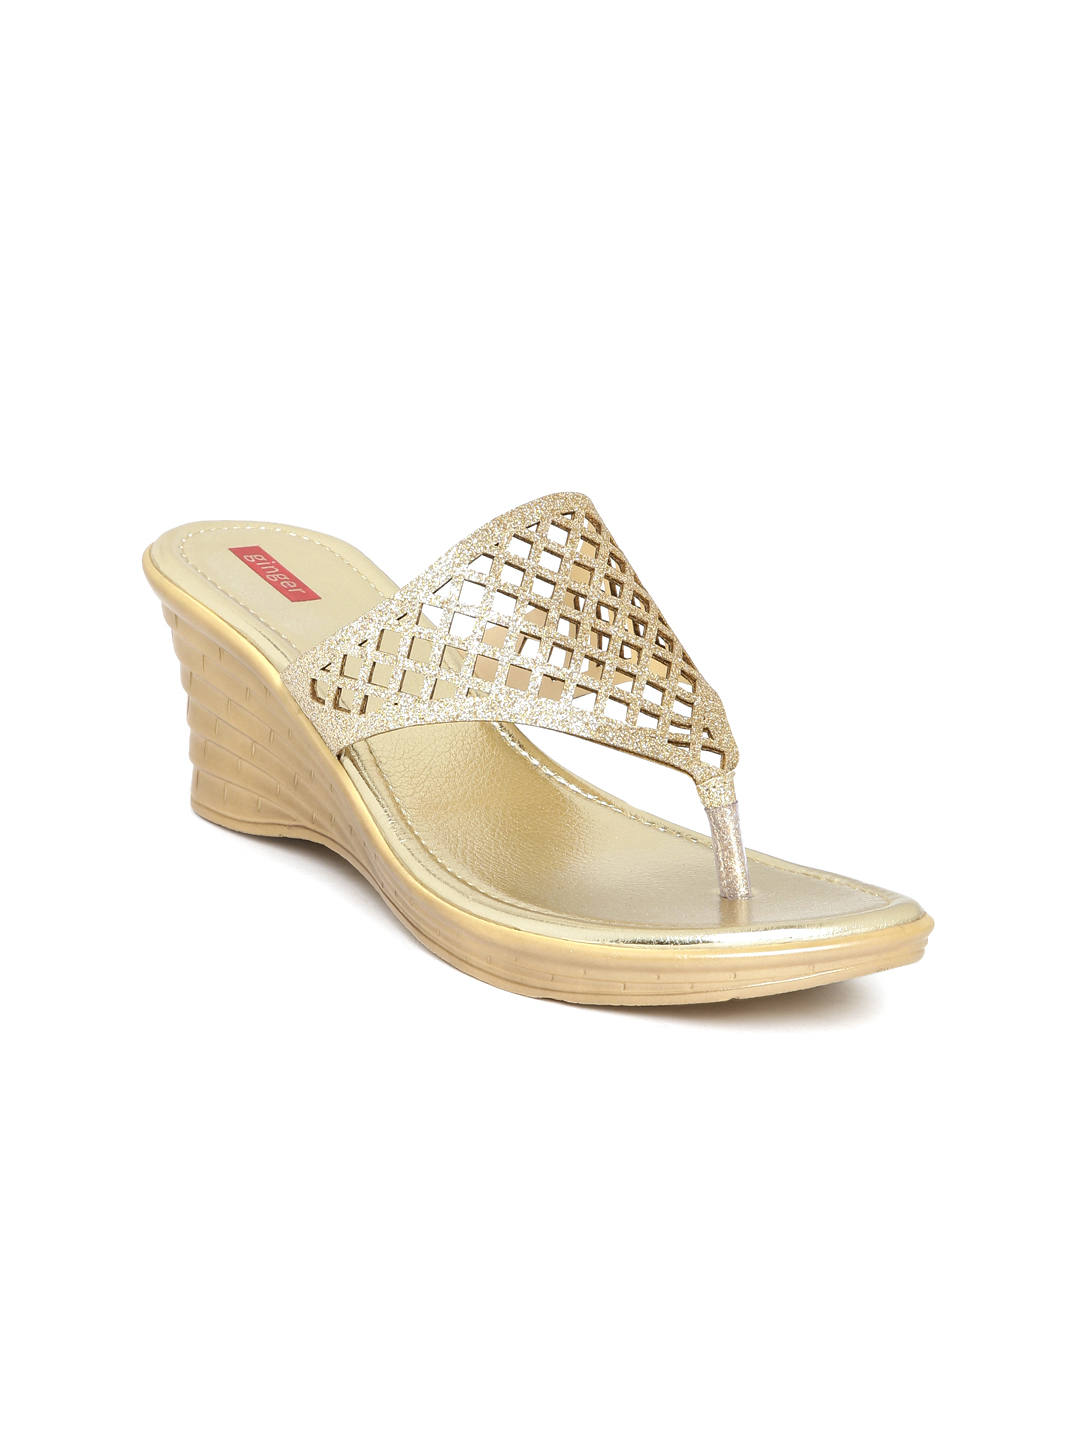 Ginger by Lifestyle Women Gold-Toned Wedges with Cut-Out Detail